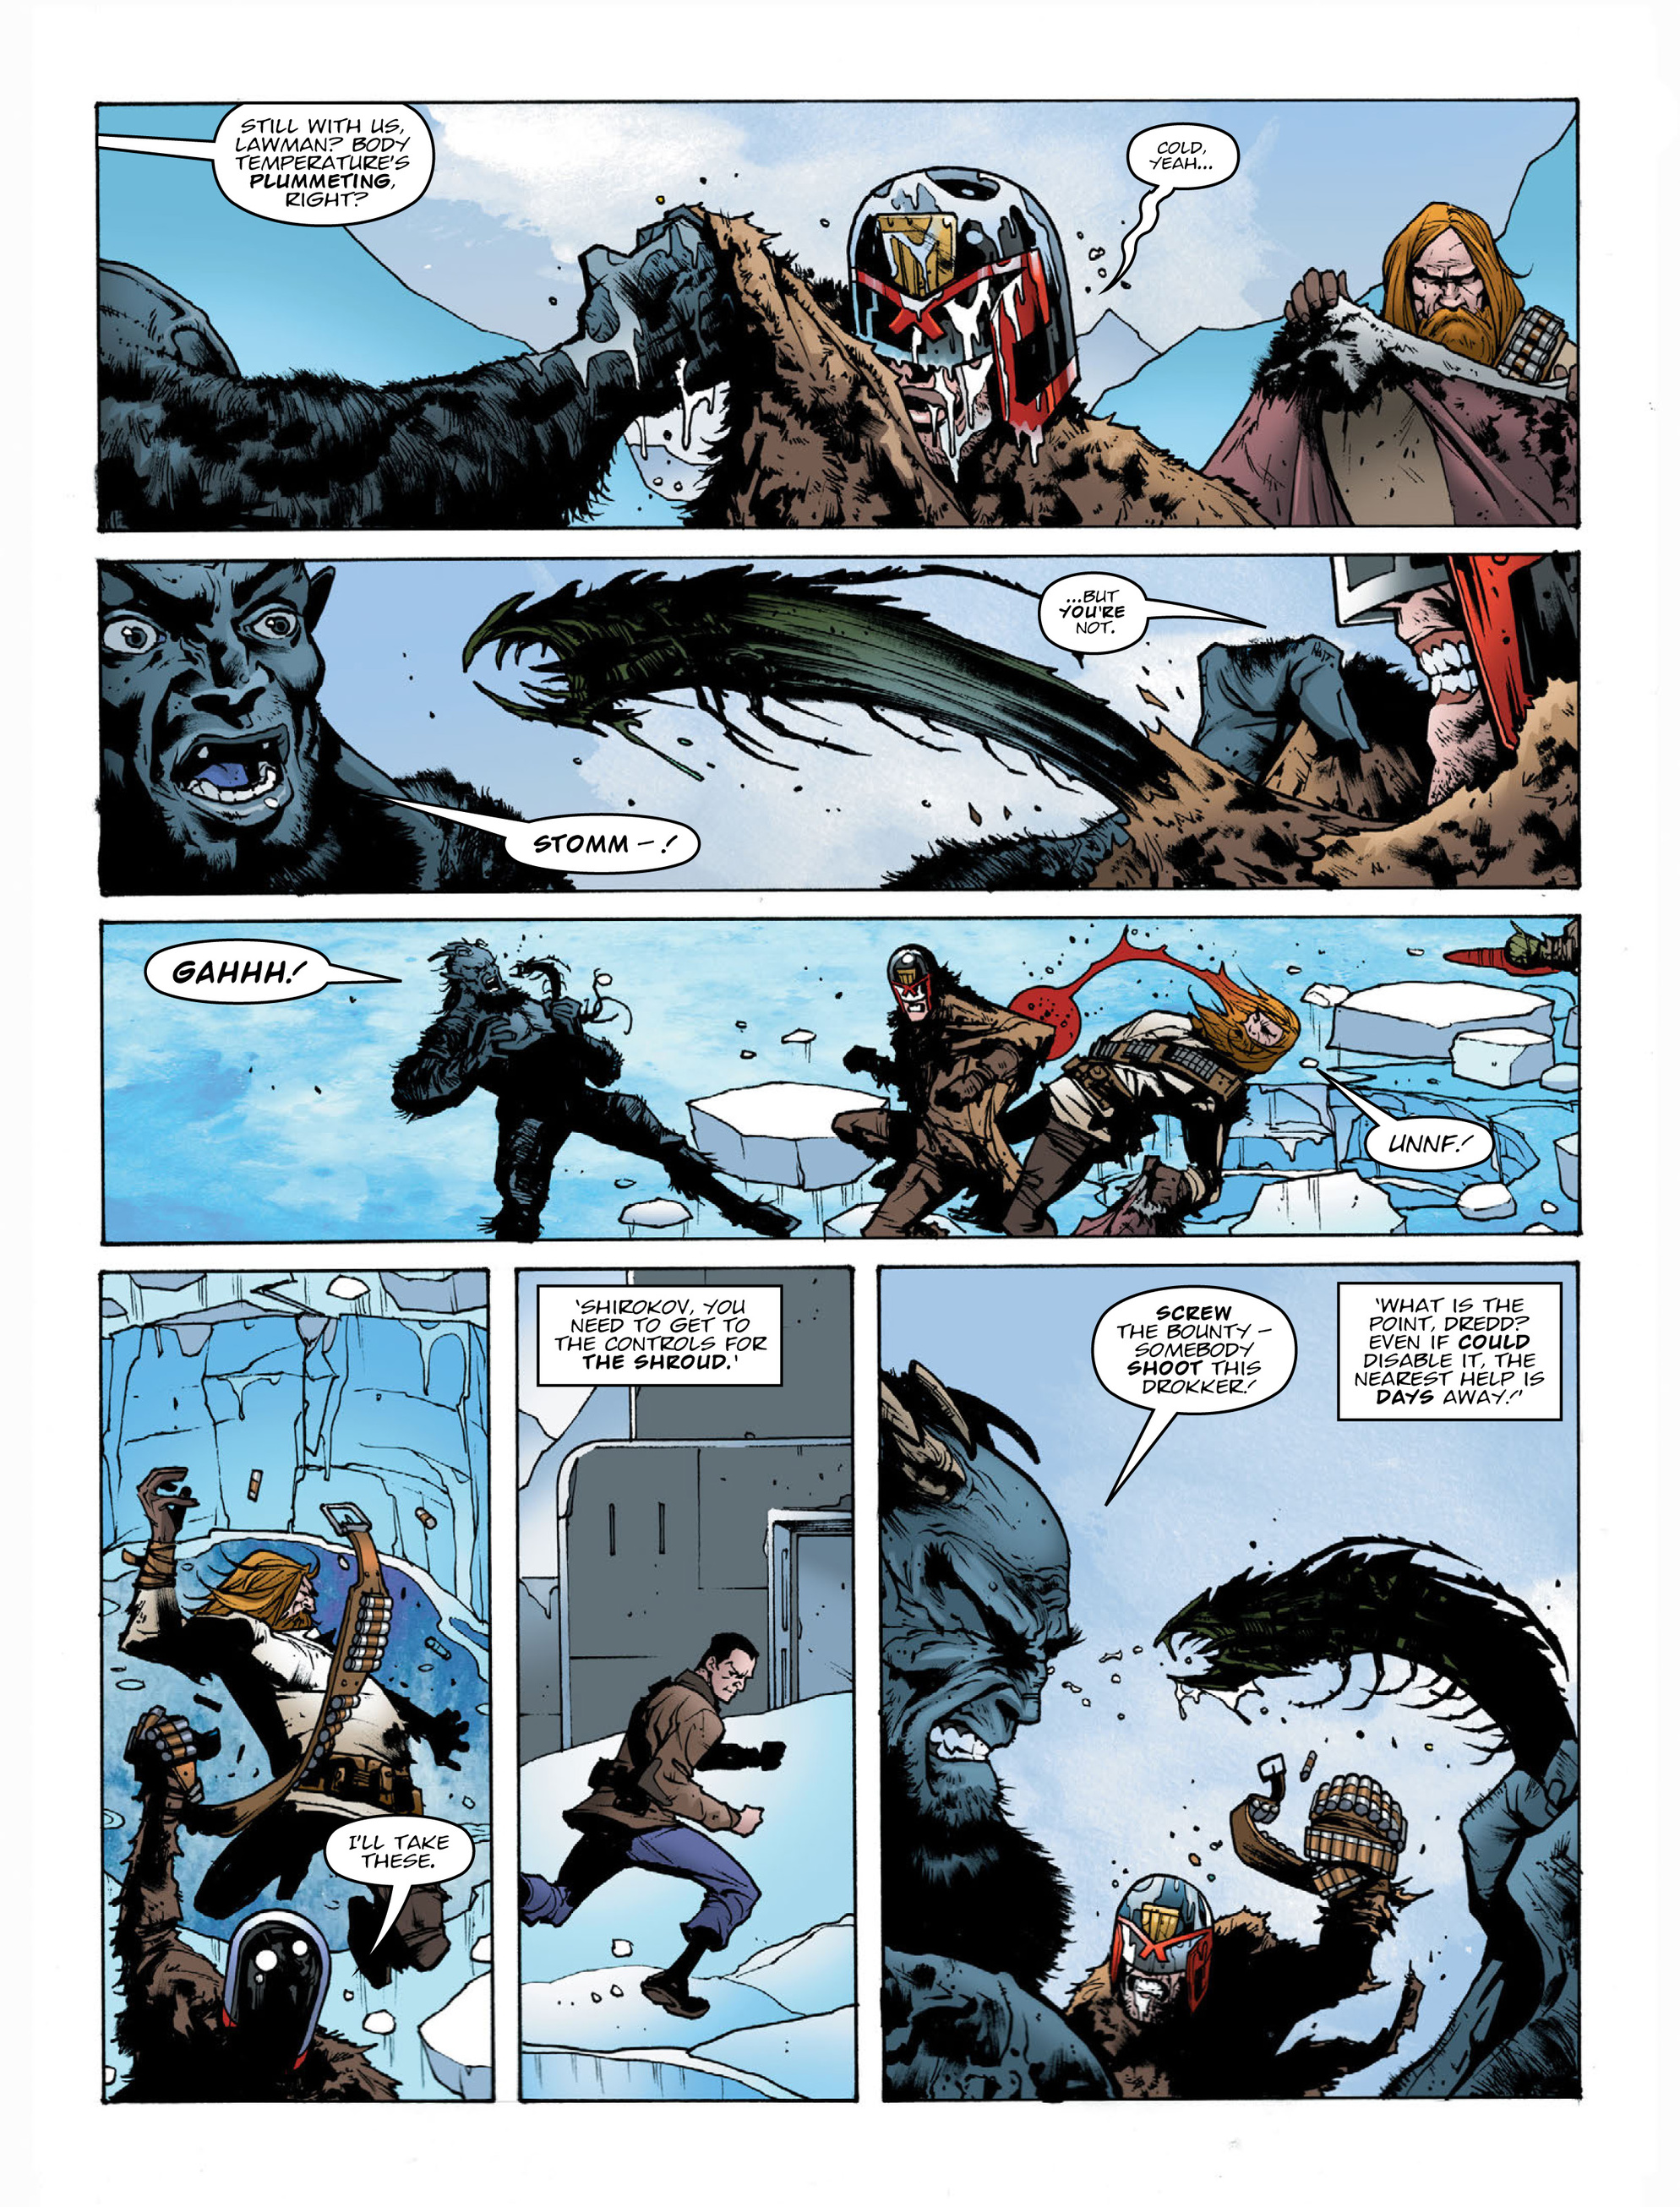 2000 AD: Chapter 2068 - Page 4